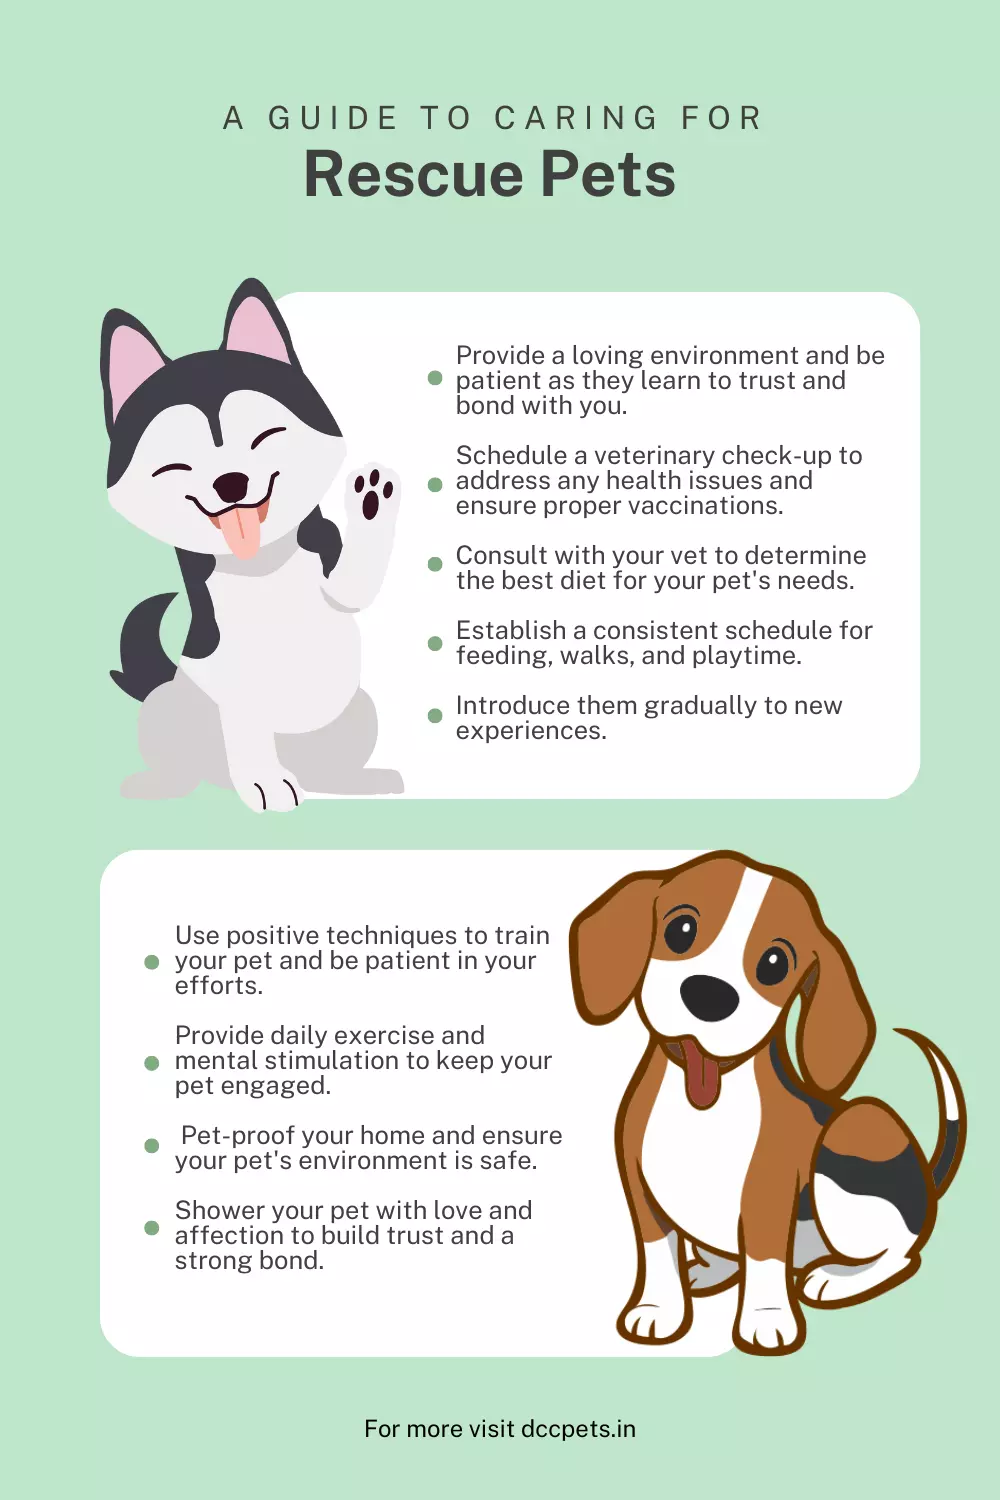 A Guide to Caring for Rescue Pets